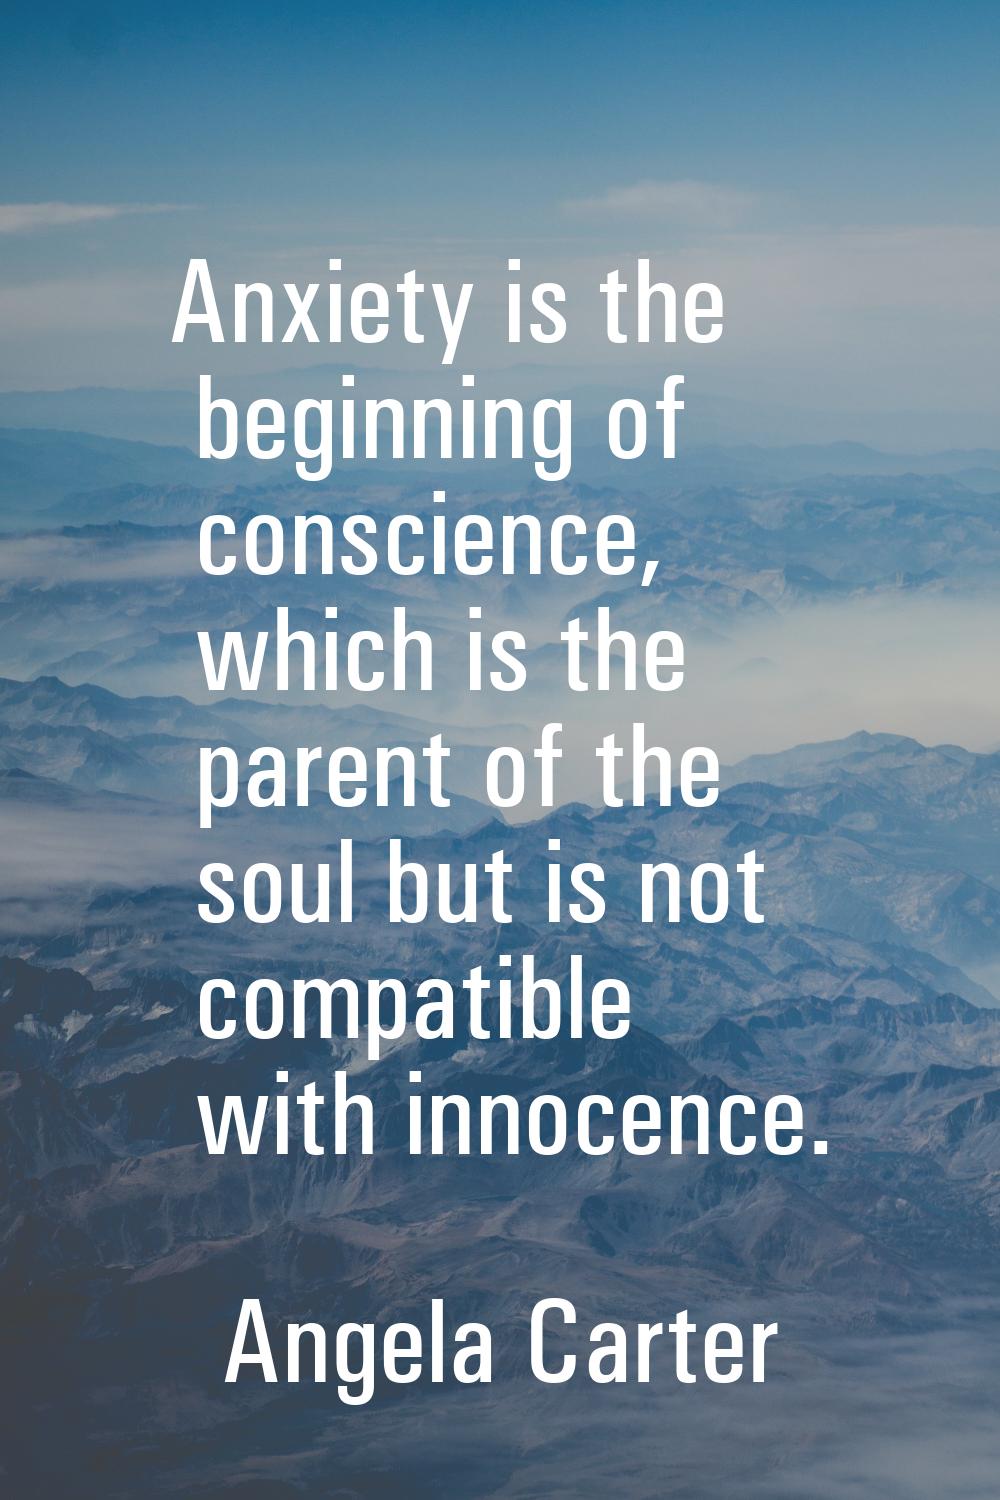 Anxiety is the beginning of conscience, which is the parent of the soul but is not compatible with 